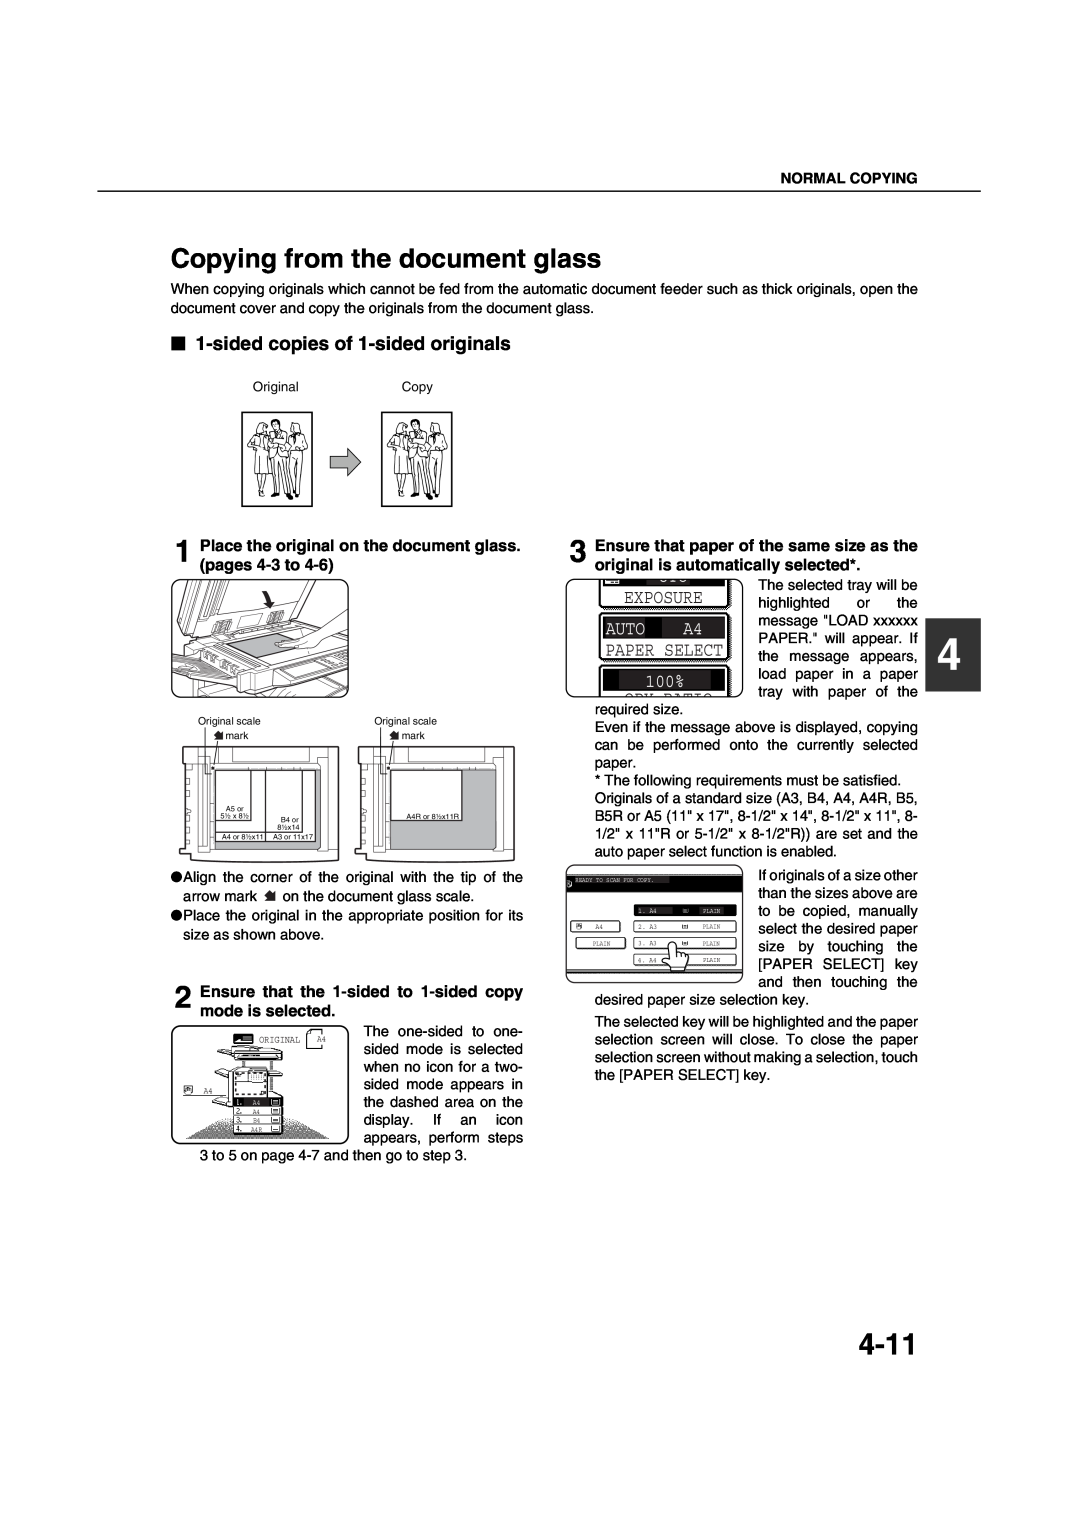 Sharp AR-M451N 4-11, Copying from the document glass, Place the original on the document glass. pages 4-3 to, Exposure 